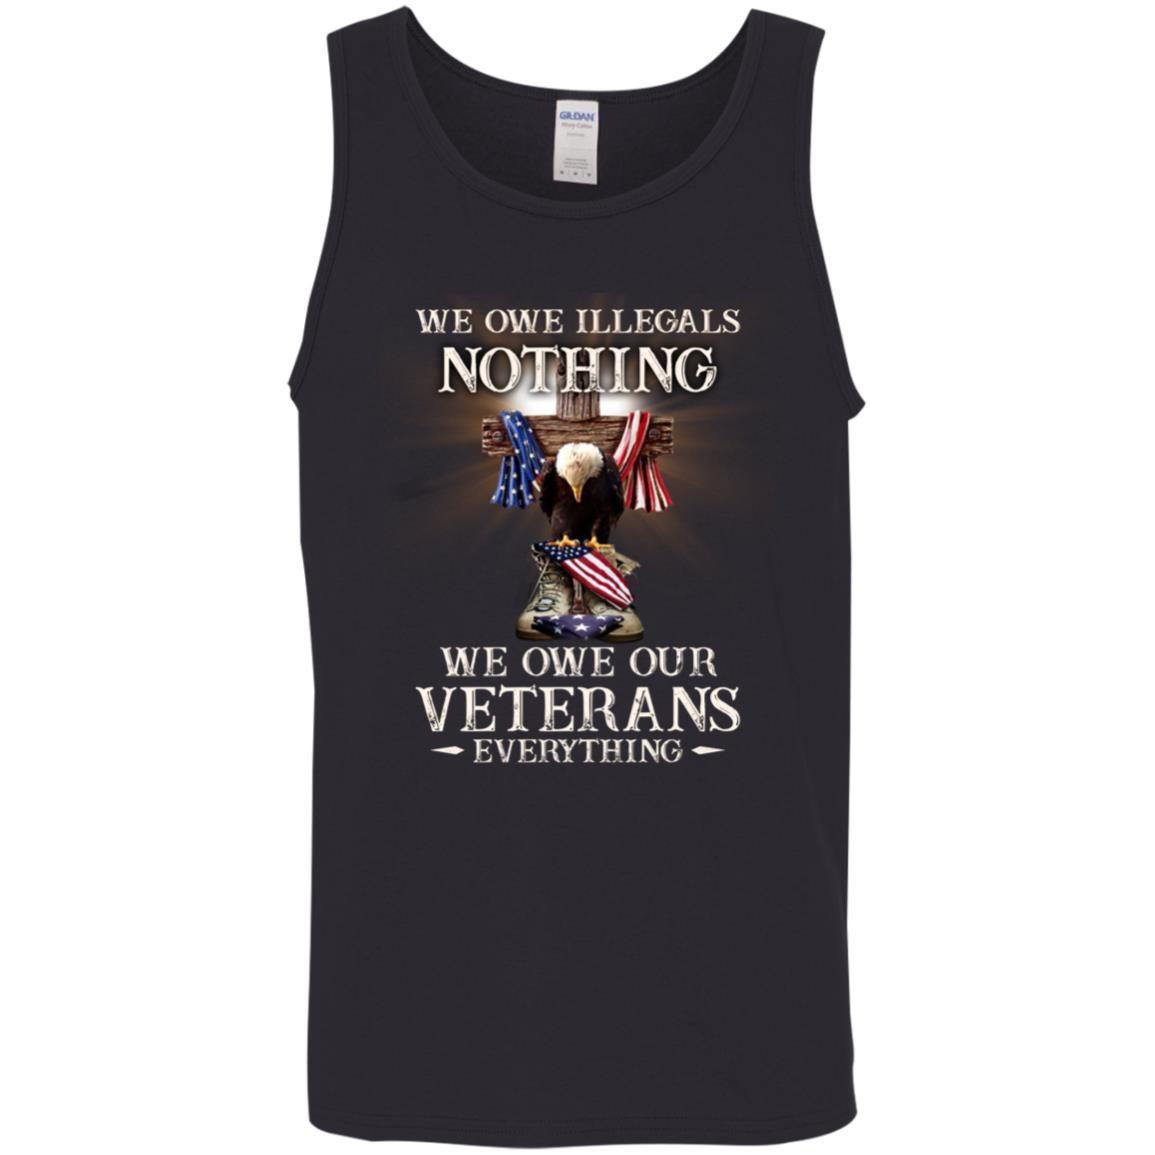 We Owe Illegals Nothing We Owe Our Veterans Everything shirt